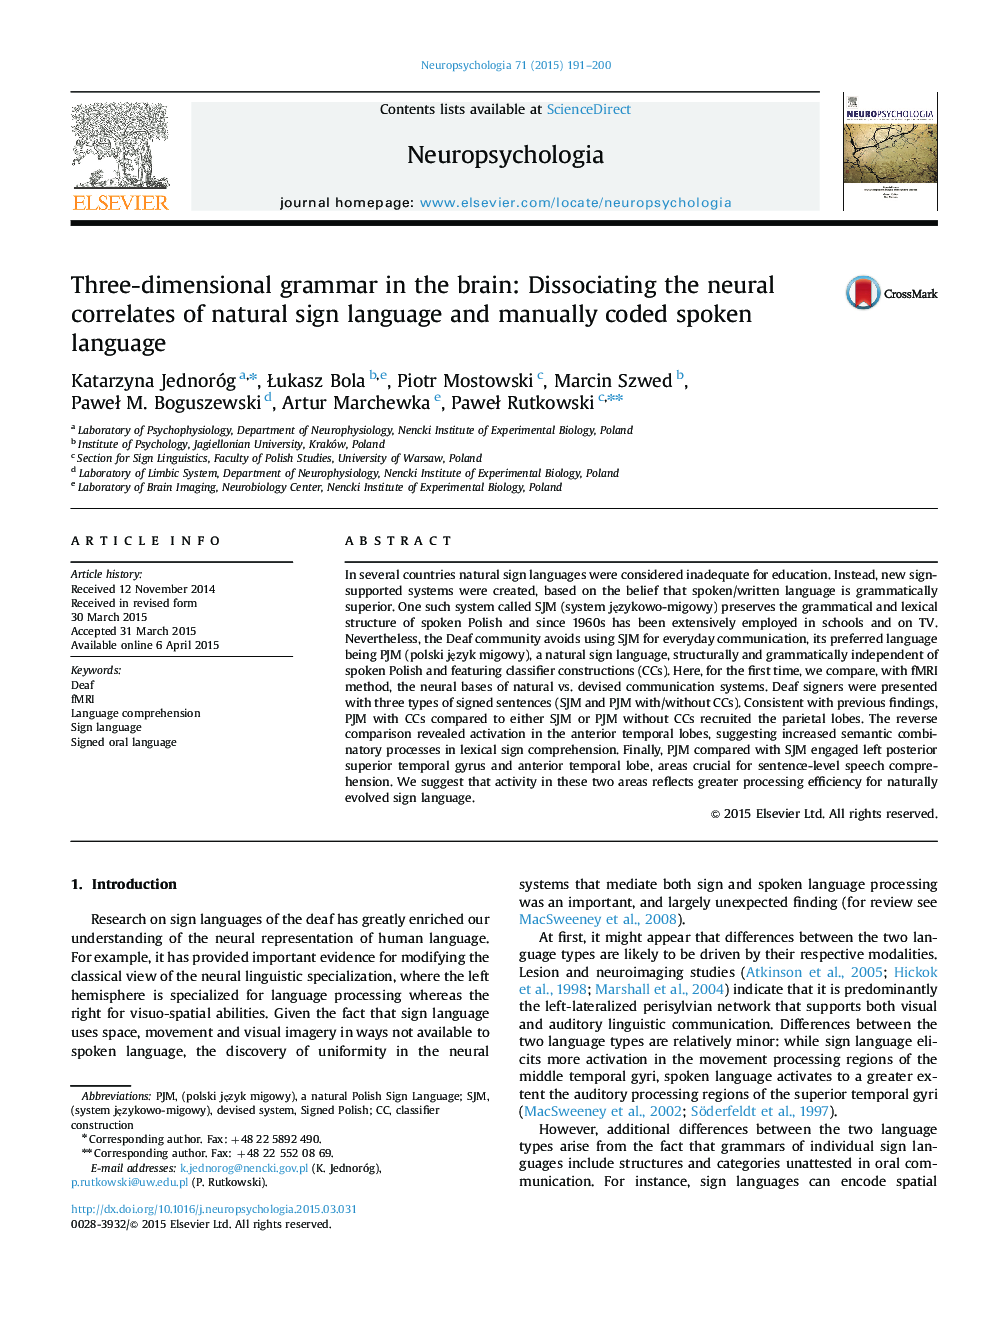 Three-dimensional grammar in the brain: Dissociating the neural correlates of natural sign language and manually coded spoken language